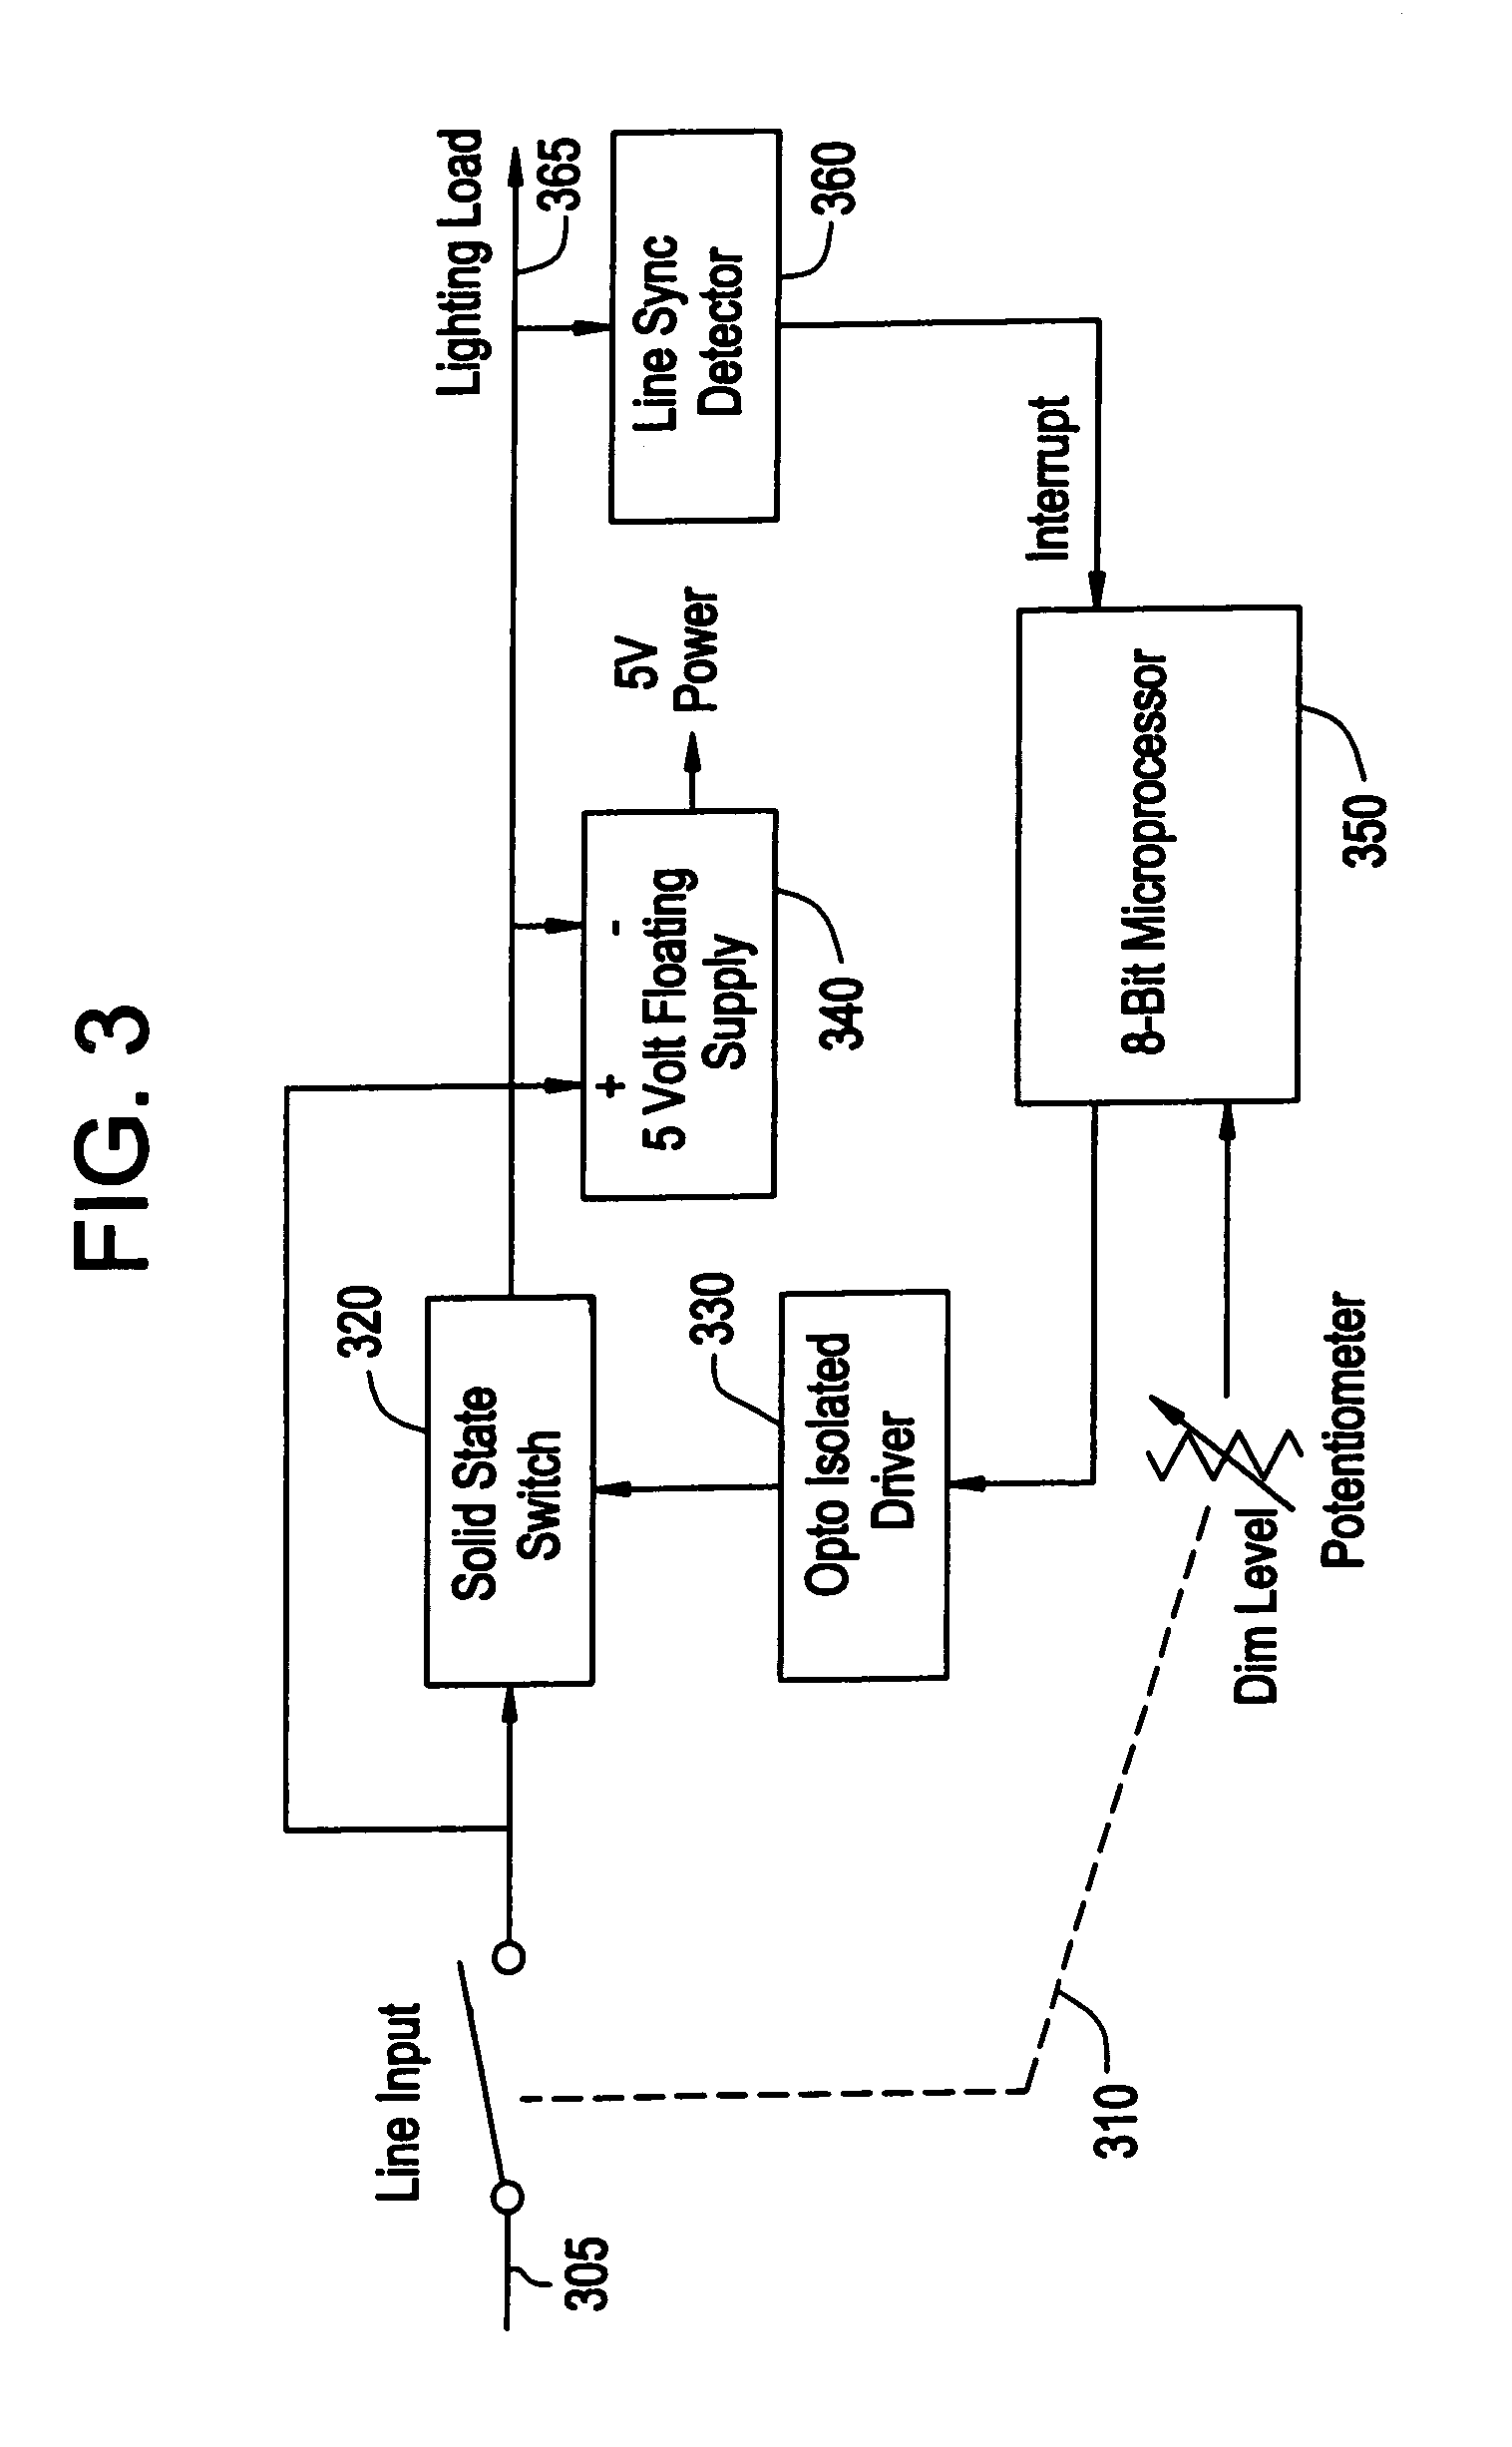 Energy savings device and method for a resistive and/or an inductive load and/or a capacitive load